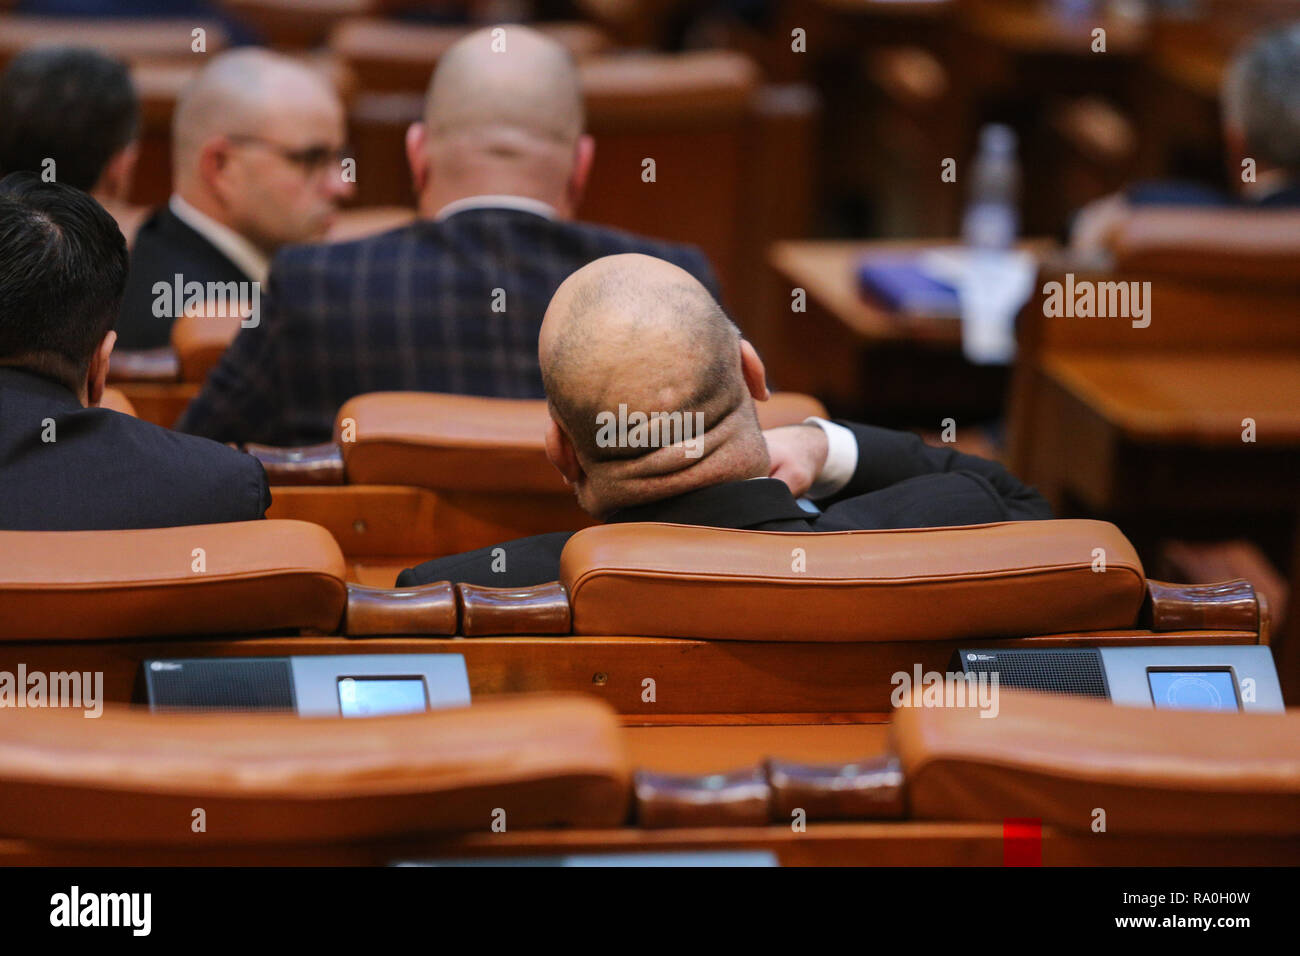 BUCHAREST, ROMANIA - December 12, 2018: Romanian member of Parliament is taking part at a meeting in the Chamber of Deputies Stock Photo